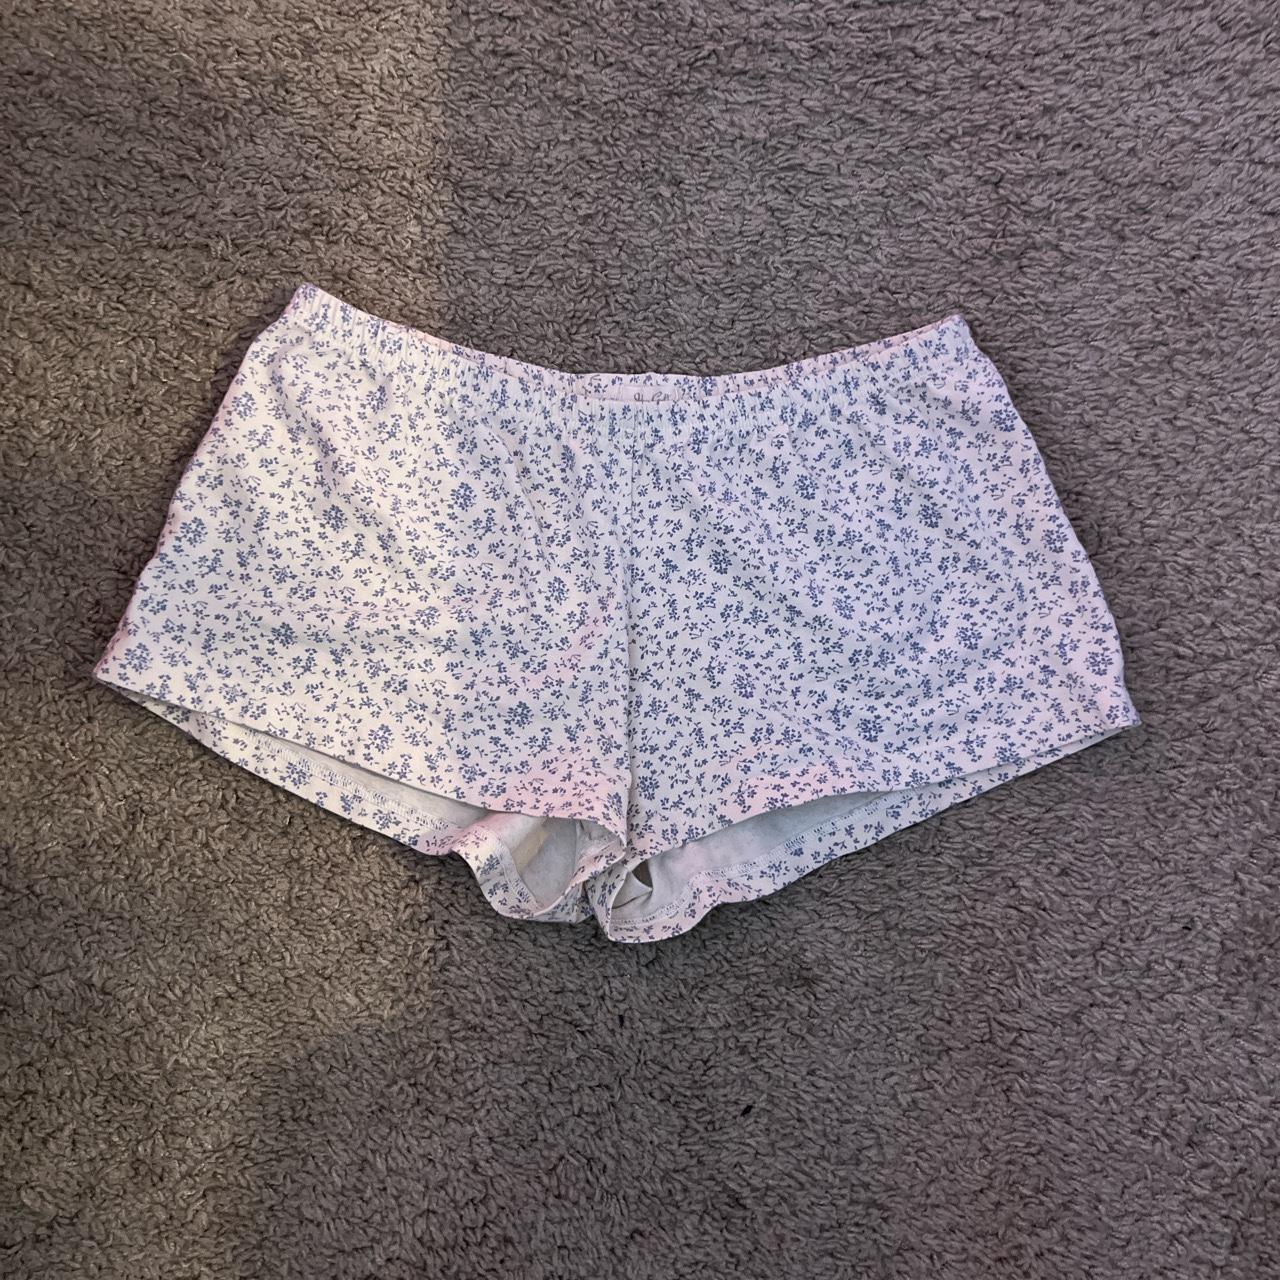 Brandy Melville Women's White and Blue Shorts